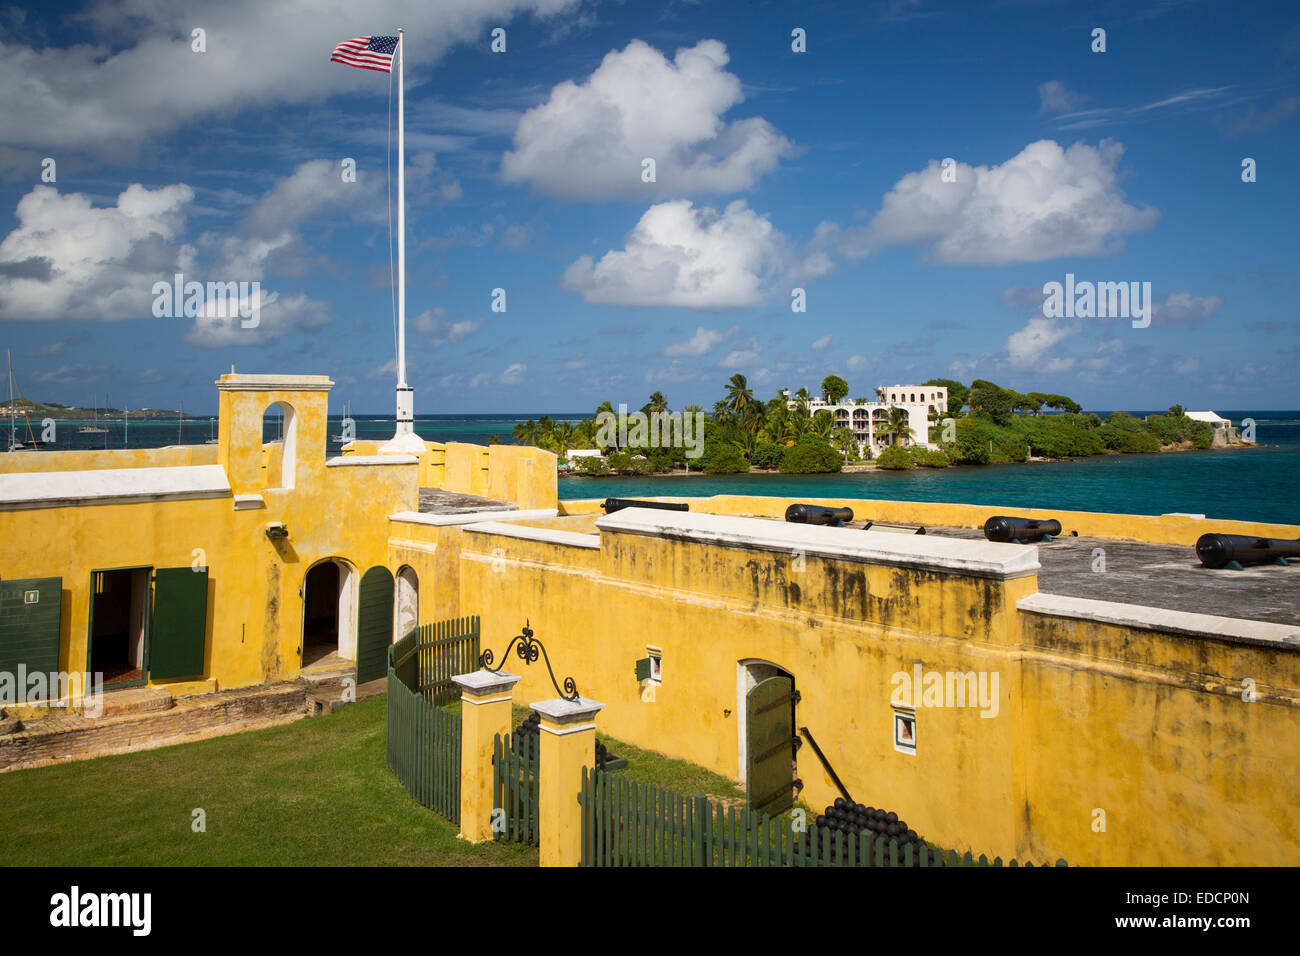 American flag flies over Fort Christiansvaern, Christiansted, St Croix, US Virgin Islands, West Indies Stock Photo